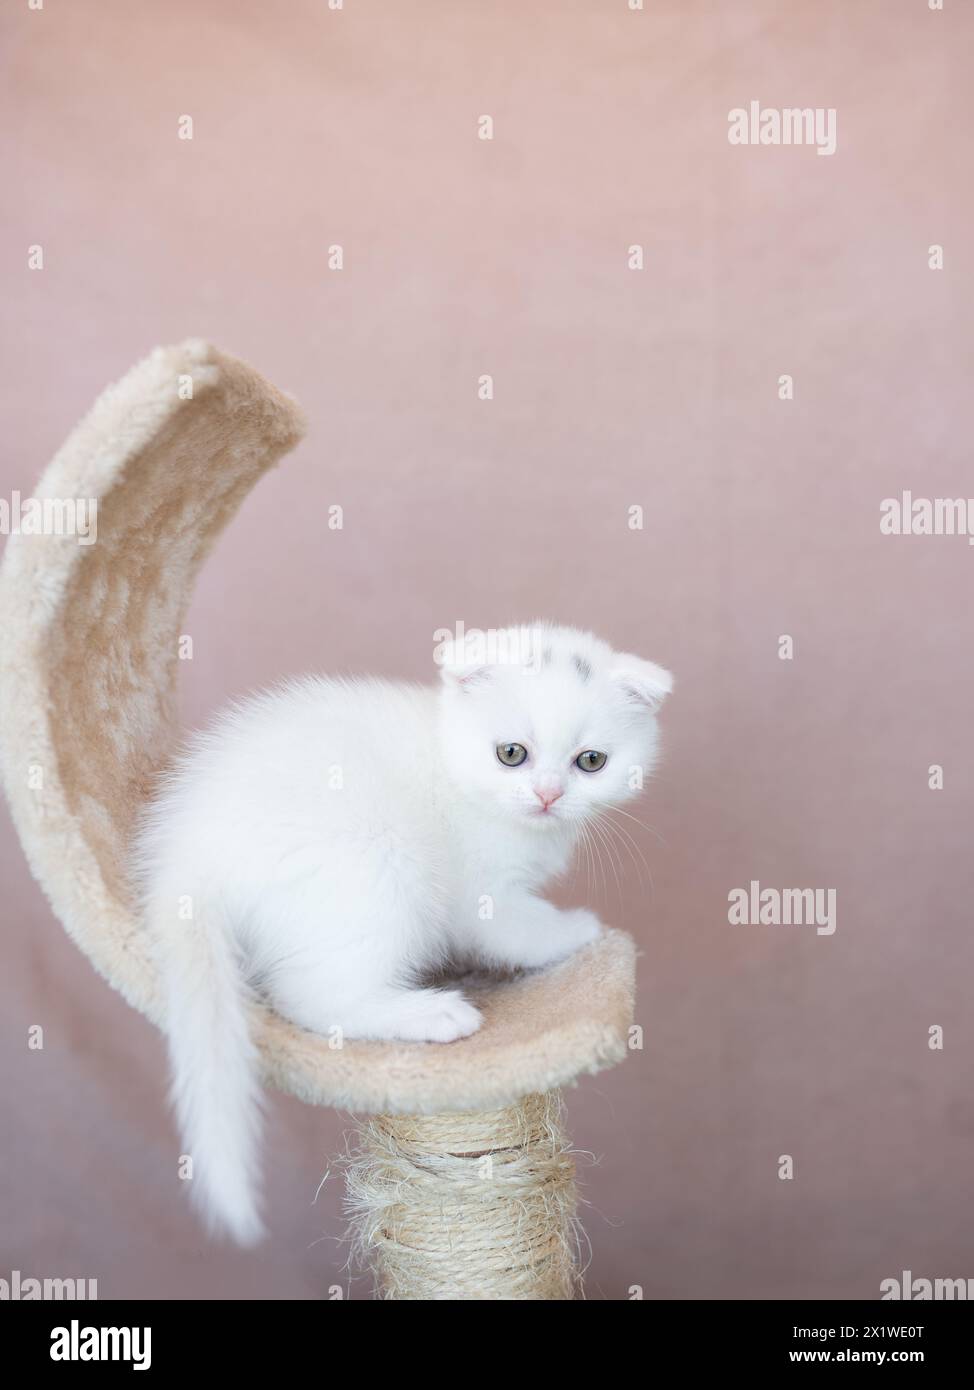 British Shorthair kitten of silver color on blue and gray backgrounds Stock Photo